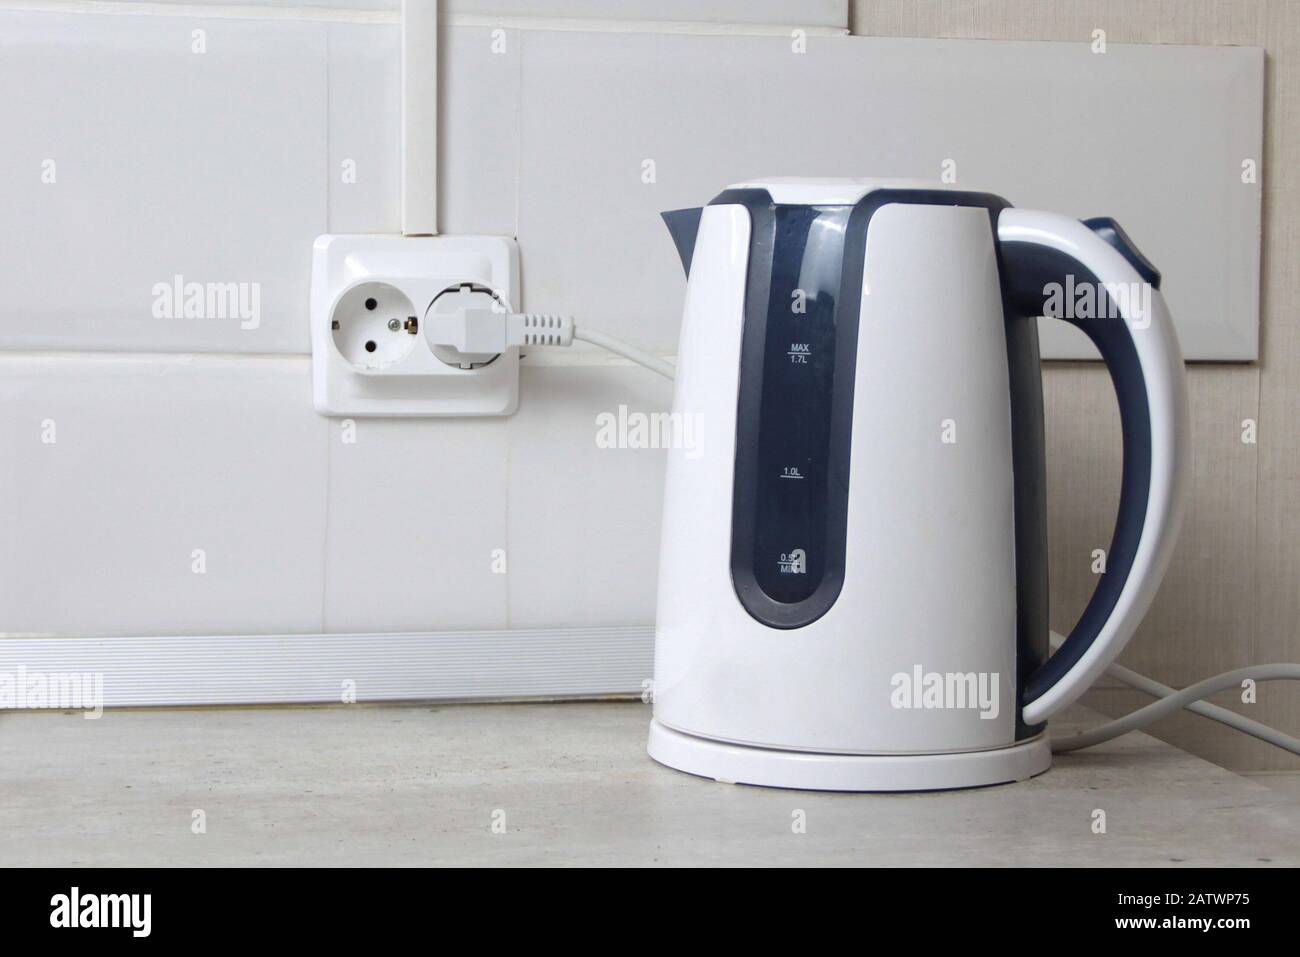 https://c8.alamy.com/comp/2ATWP75/white-electric-kettle-stands-on-a-gray-table-plugged-into-a-power-outlet-2ATWP75.jpg